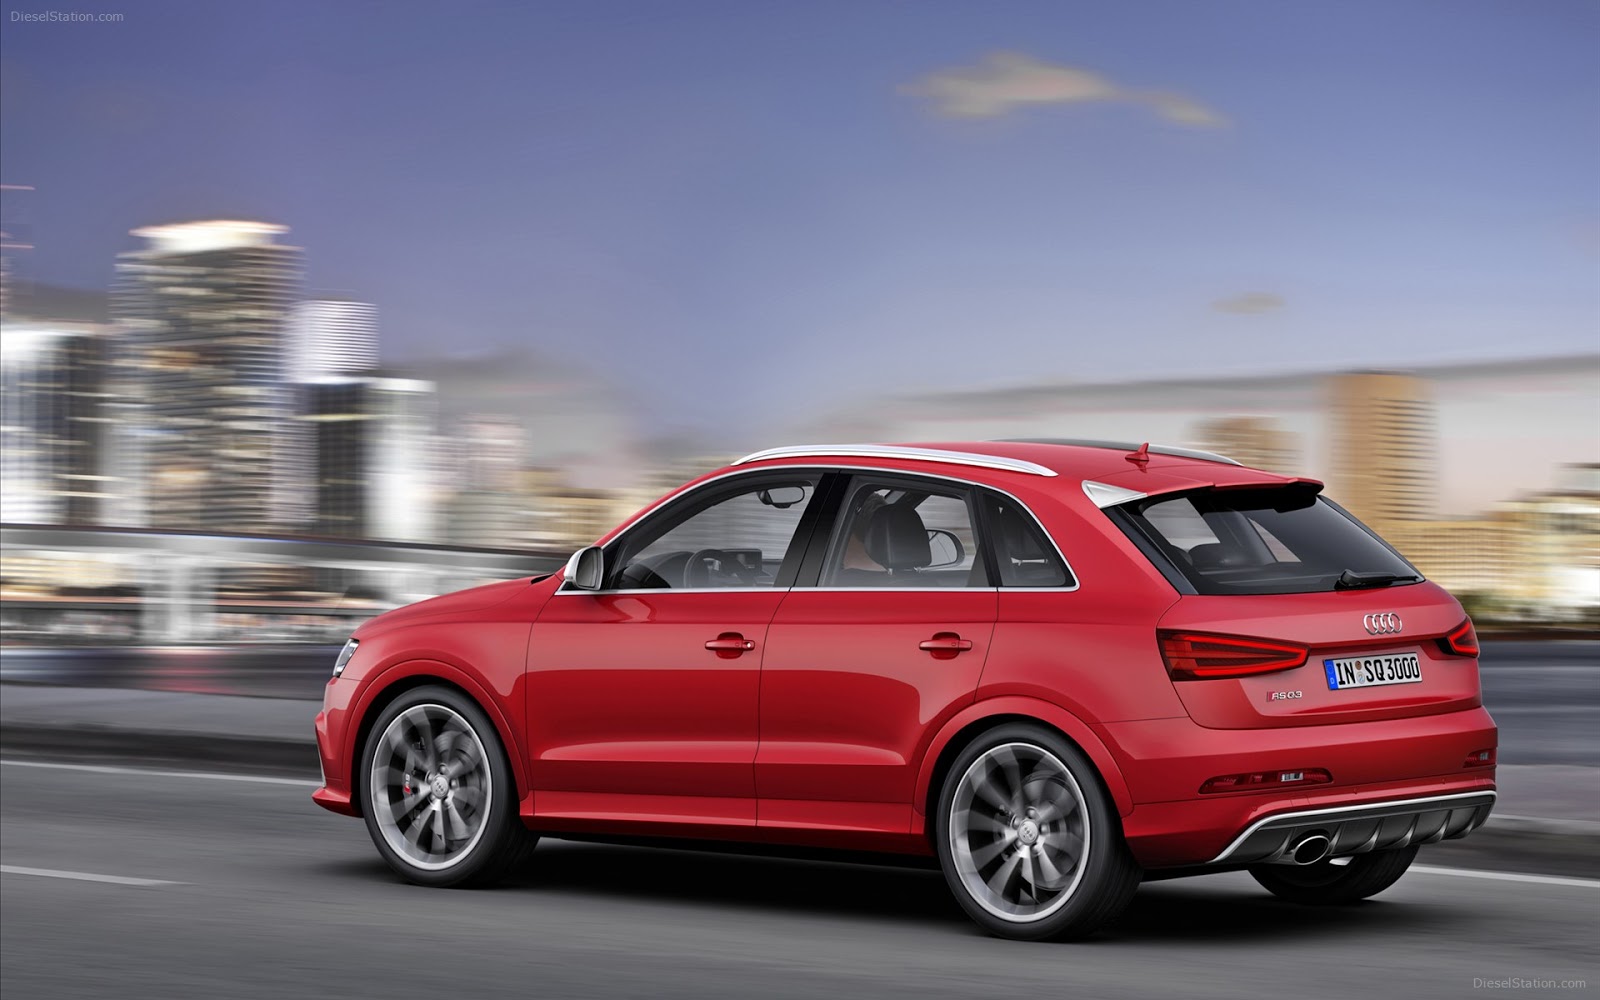 Audi Q3 2013 Review Price Specification | New Car Price ...